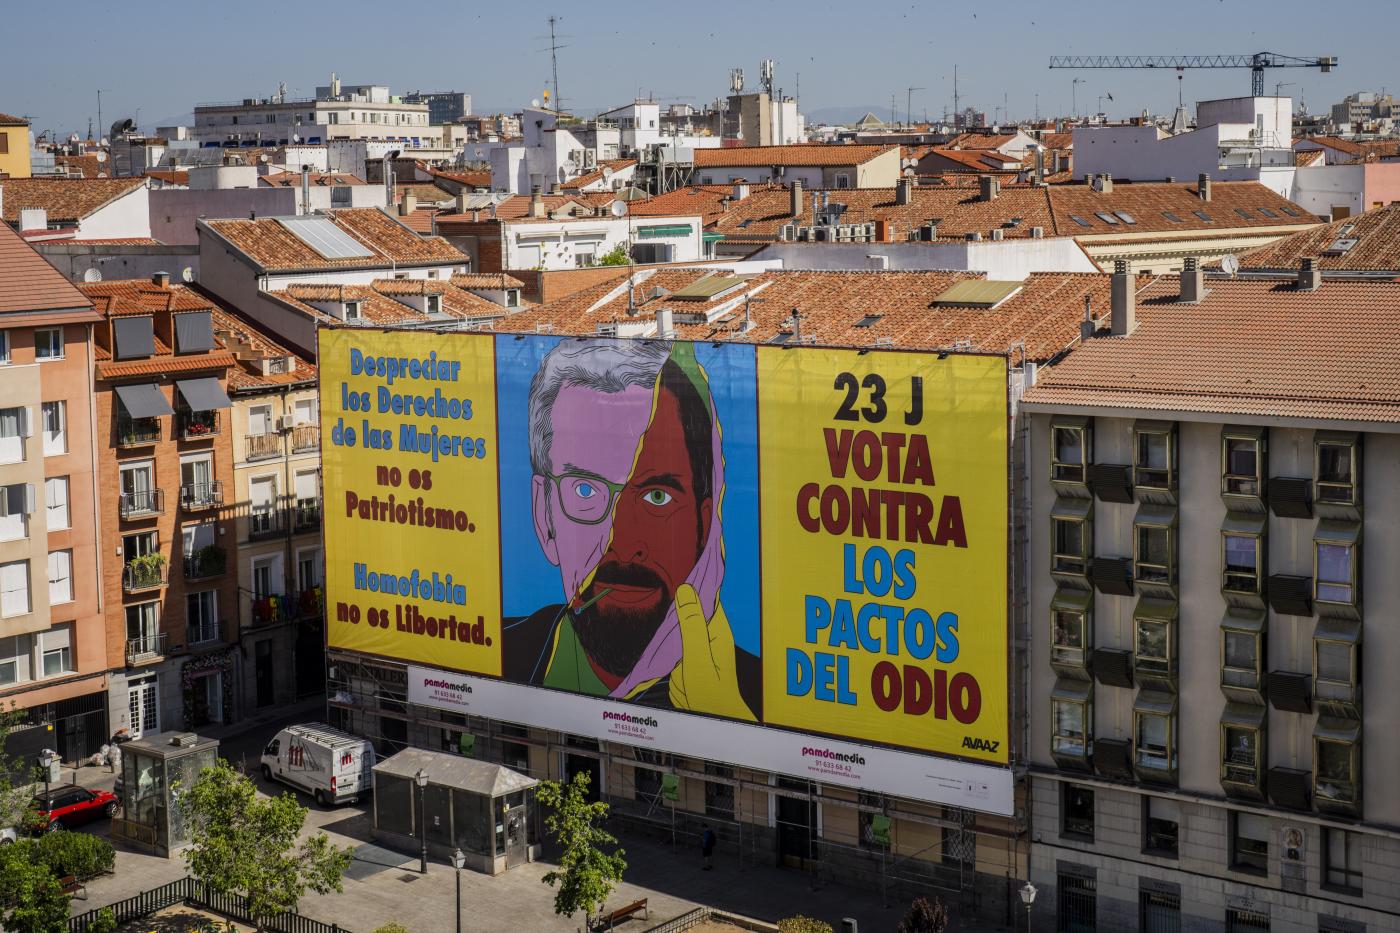 A huge banner is displayed Pedro Zerolo Square, urging people to vote against the possible allegiance between center-right wing Popular Party and Vox, the extreme right party, in Madrid, Spain, Saturday, July 15, 2023. The banner reads in Spanish: "Disregarding women's rights is not patriotism. Homophobia is not freedom. Vote against hate deals". (AP Photo/Bernat Armangue)

Associated Press/LaPresse
Only Italy and Spain